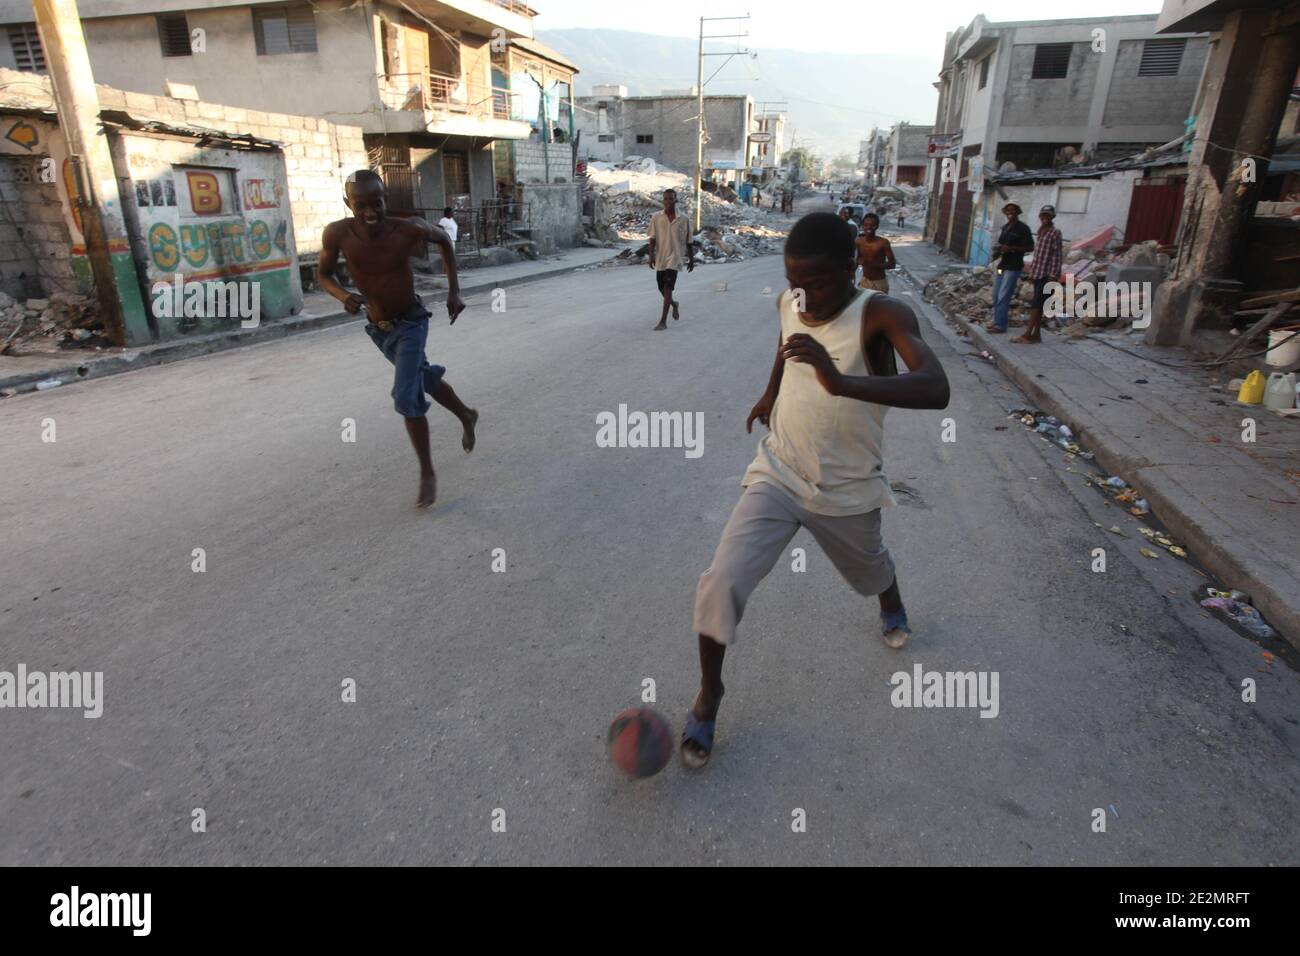 Young men play football barefoot on a street of Port-au-Prince, Haiti on Sunday February 7, 2010. Life gets almost to normal 3 weeks after January 12th devastating earthquake. A woman passing by said with dark humor taking pix of kids playing in the actual situation, makes no sense. Photo by Normand Blouin/ABACAPRESS.COM Stock Photo